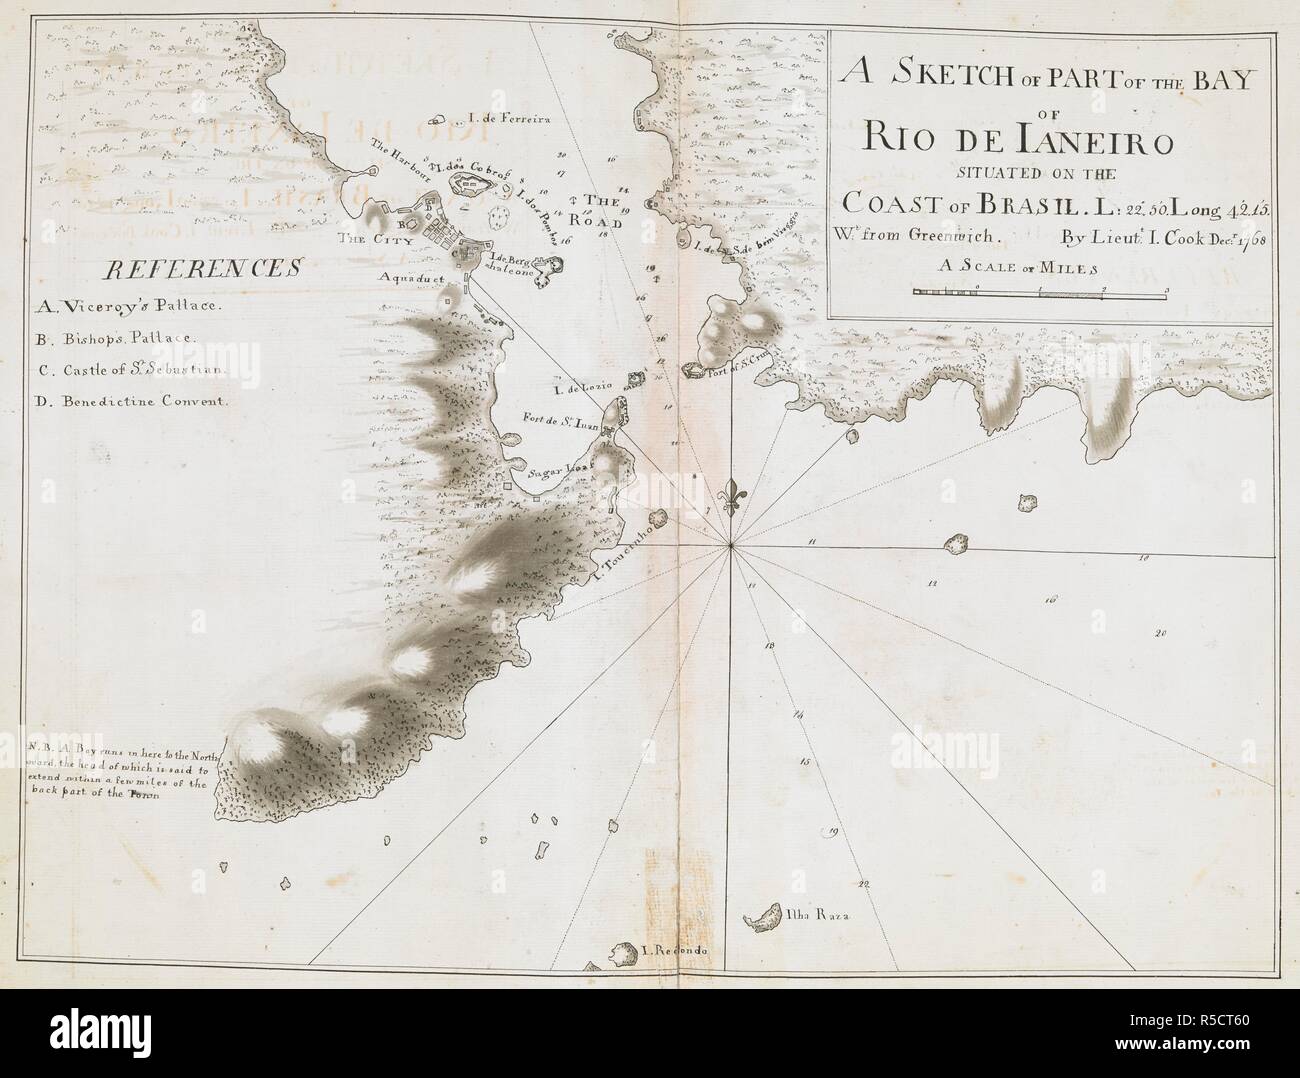 A sketch of part of the Bay of Rio de Janeiro; drawn by Lieut. James Cook, in Dec. 1768, on a scale of an inch to a mile. Charts, Plans, Views, and Drawings taken on board the Endeavour during Captain Cook's First Voyage, 1768-1771. Dec. 1768. Ms. 1 f. 7 in. x 1 f. 3 in.; 48 x 38 cm.; Scale 1: 63 360. 1 inch to a mile. Source: Add. 7085, No.2. Stock Photo